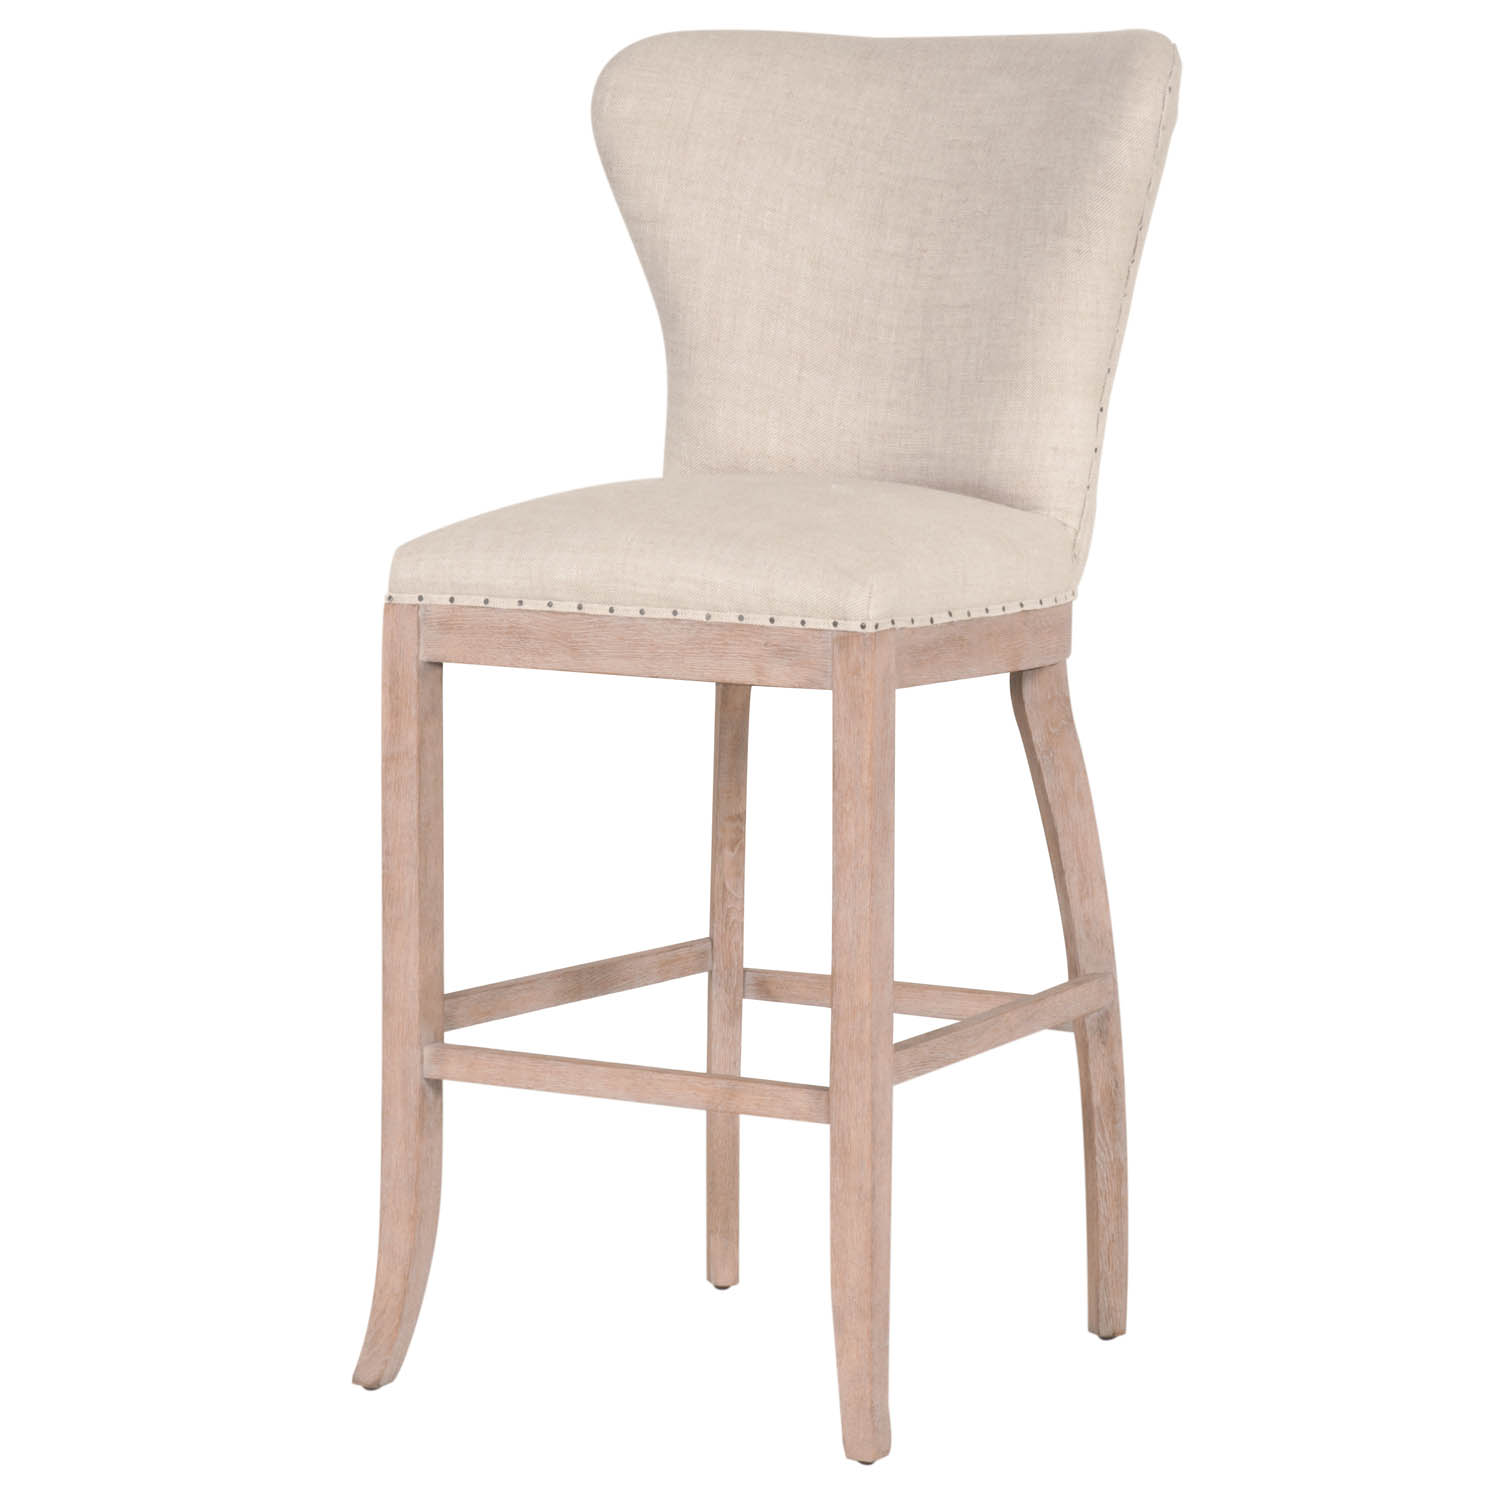 French Bar Stool Ottoman Fabric Wooden Leisur Chair Loung With